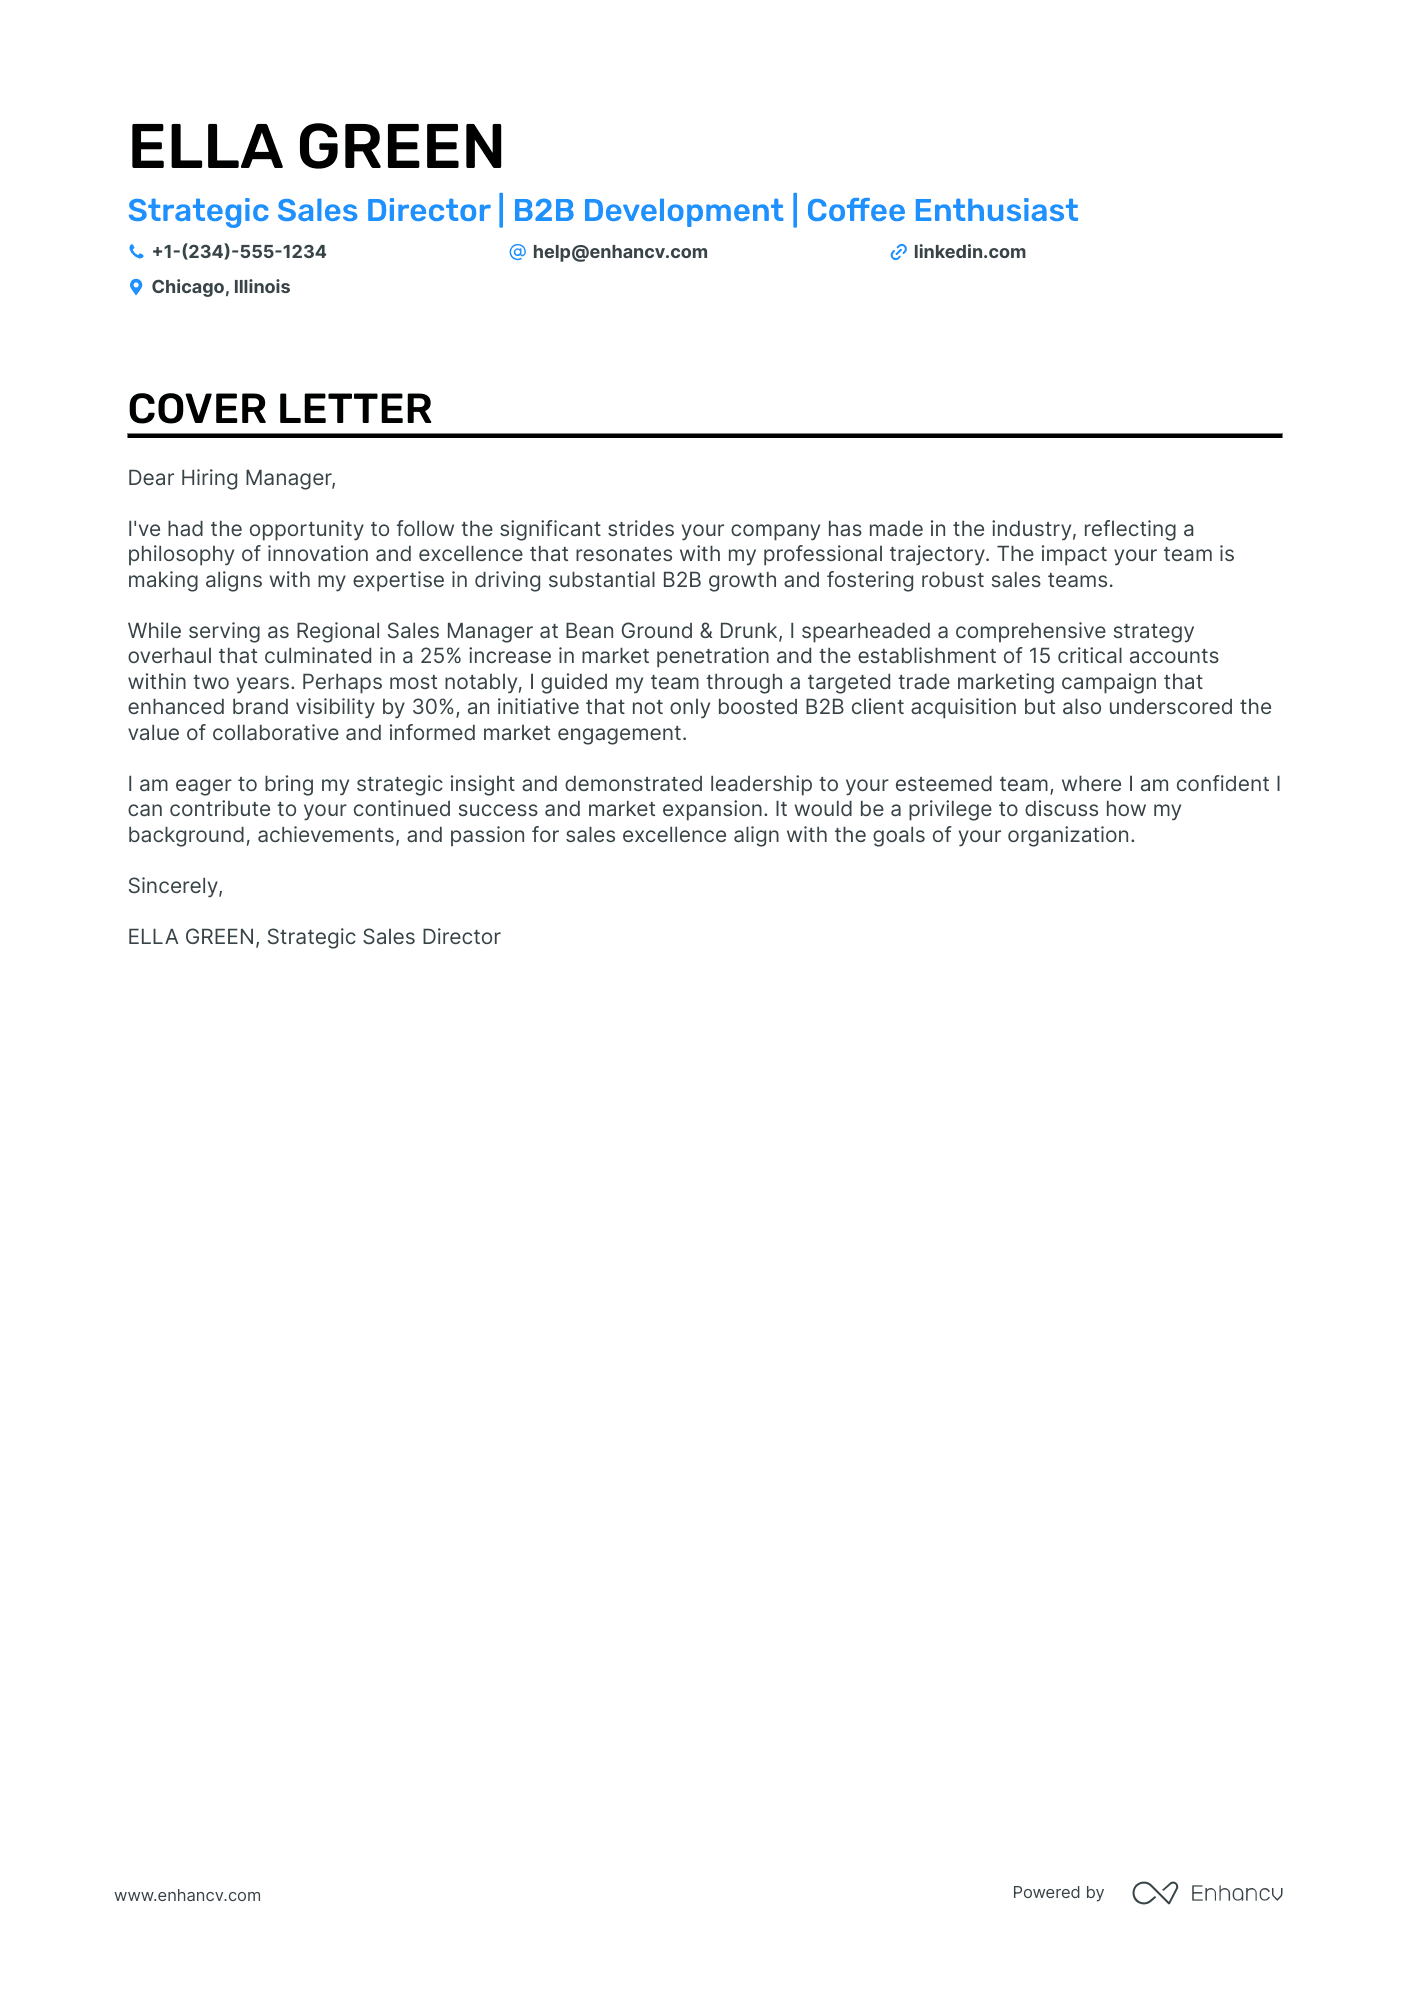 Distribution Manager cover letter